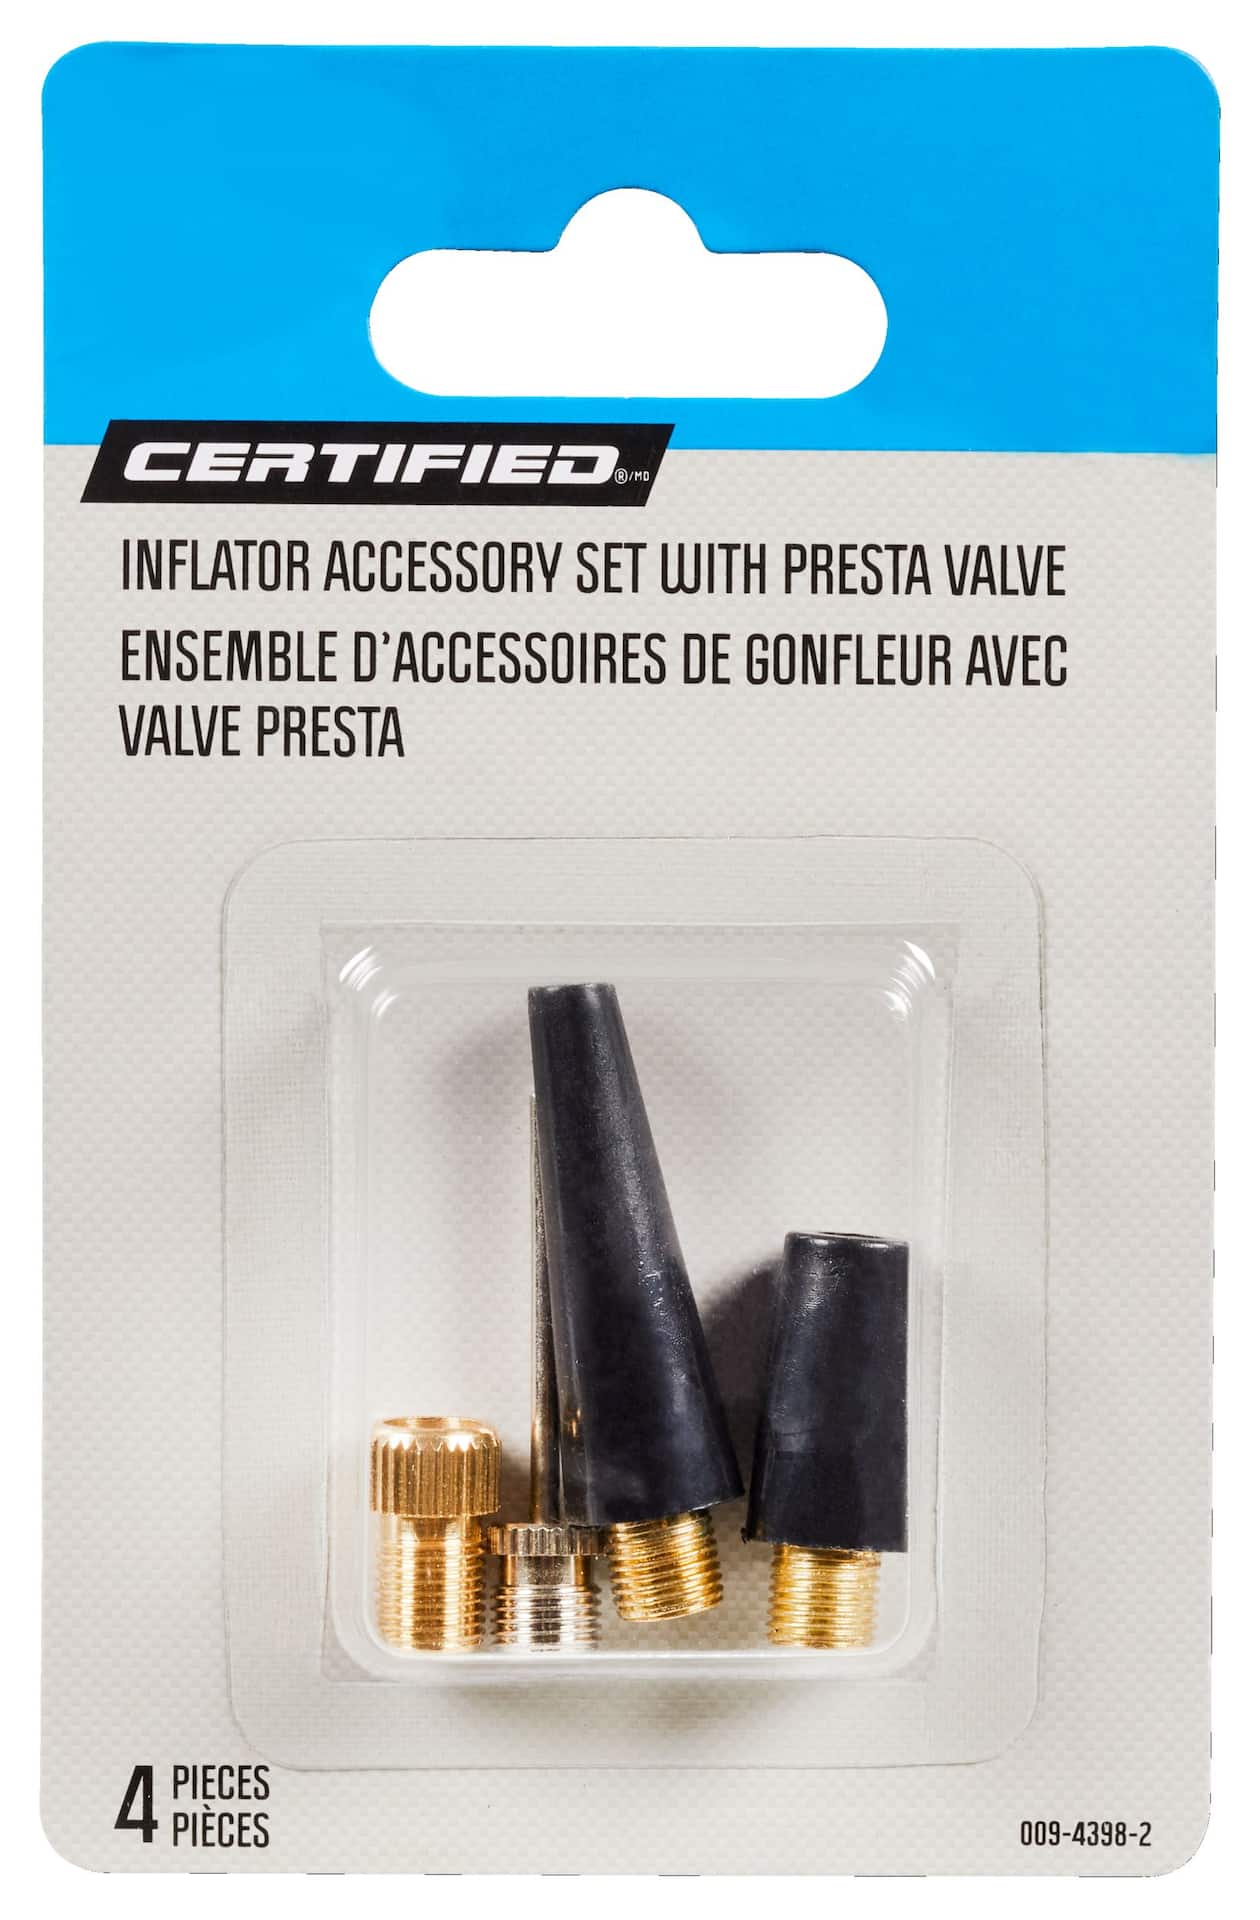 https://media-www.canadiantire.ca/product/automotive/auto-maintenance/auto-shop-equipment-supplies/0094398/certified-inflator-accessory-kit-with-presta-valve-ef5beb0e-2048-4603-82f1-cecd89c0e7ee-jpgrendition.jpg